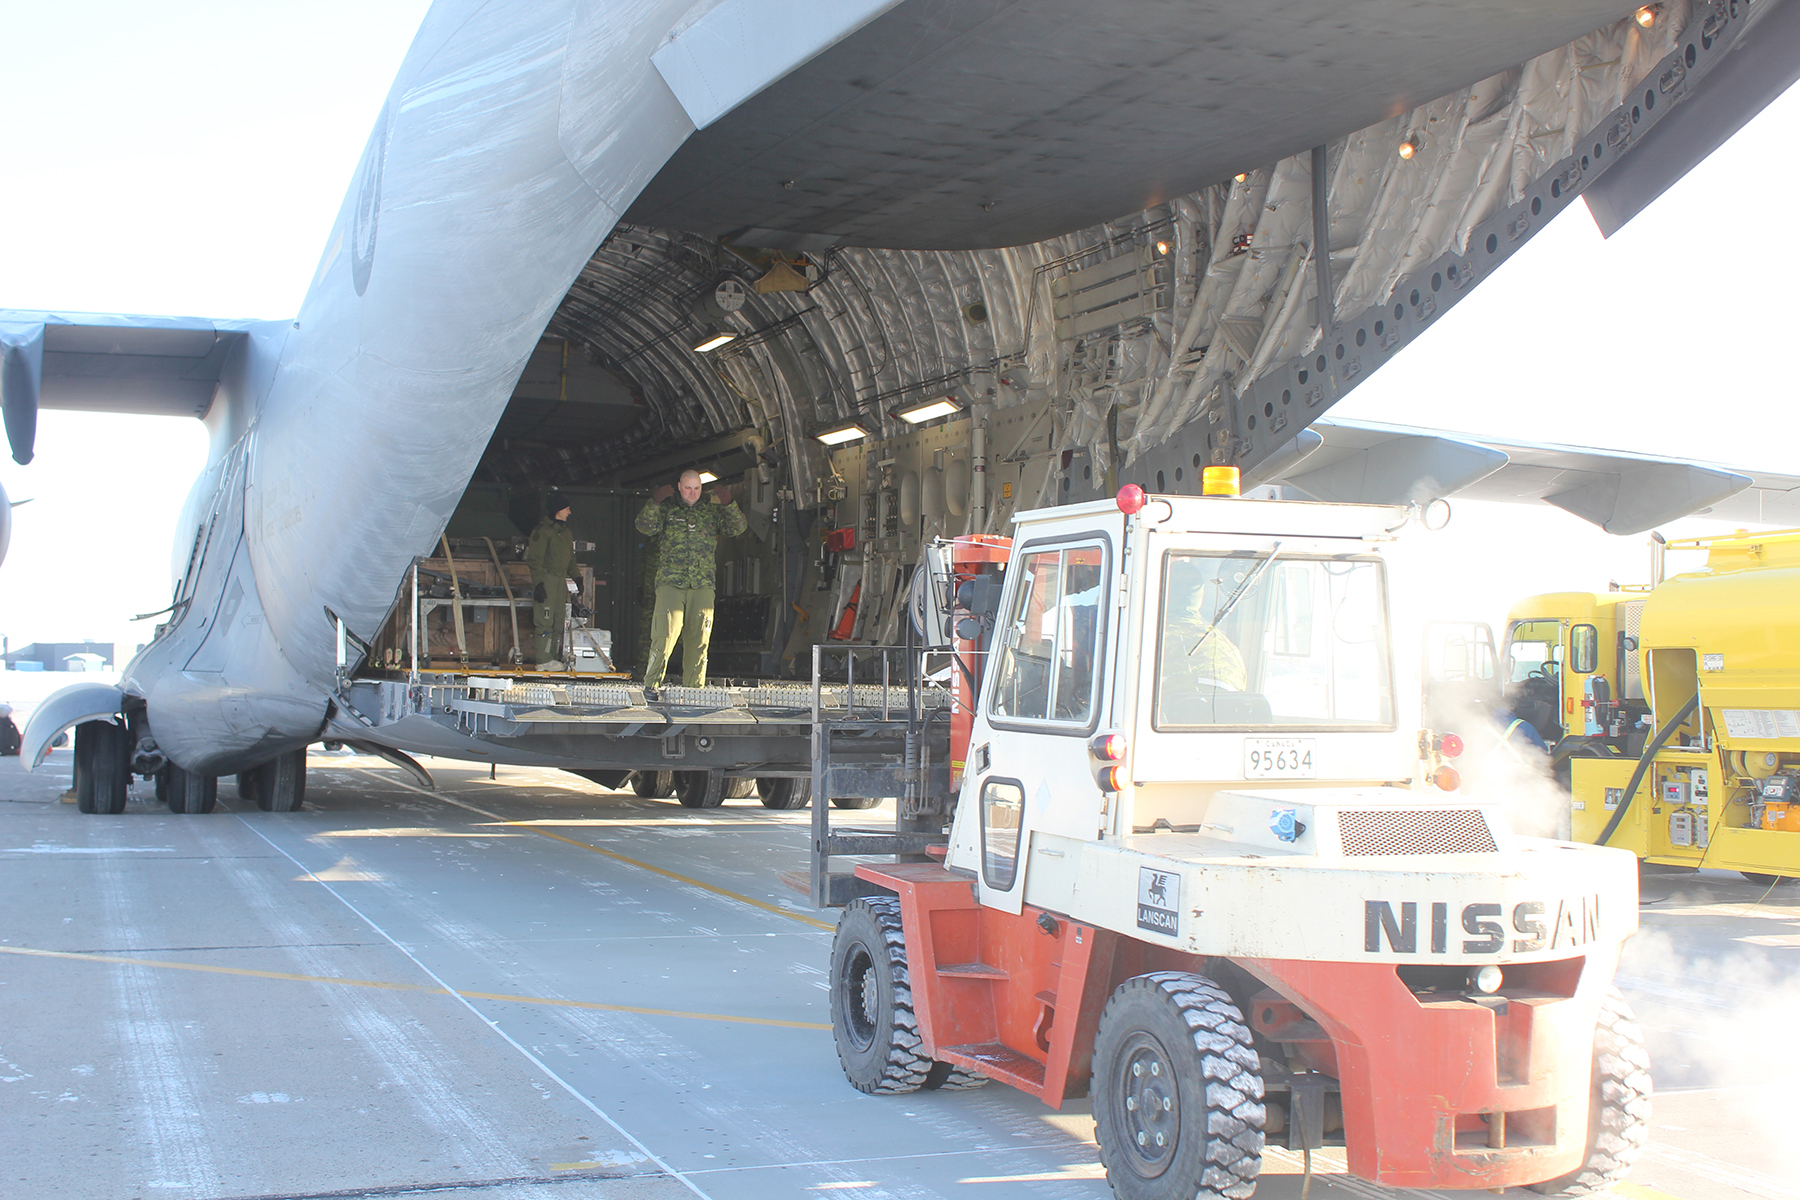 A front-end loader positions itself behind the open cargo ramp of a large aircraft.